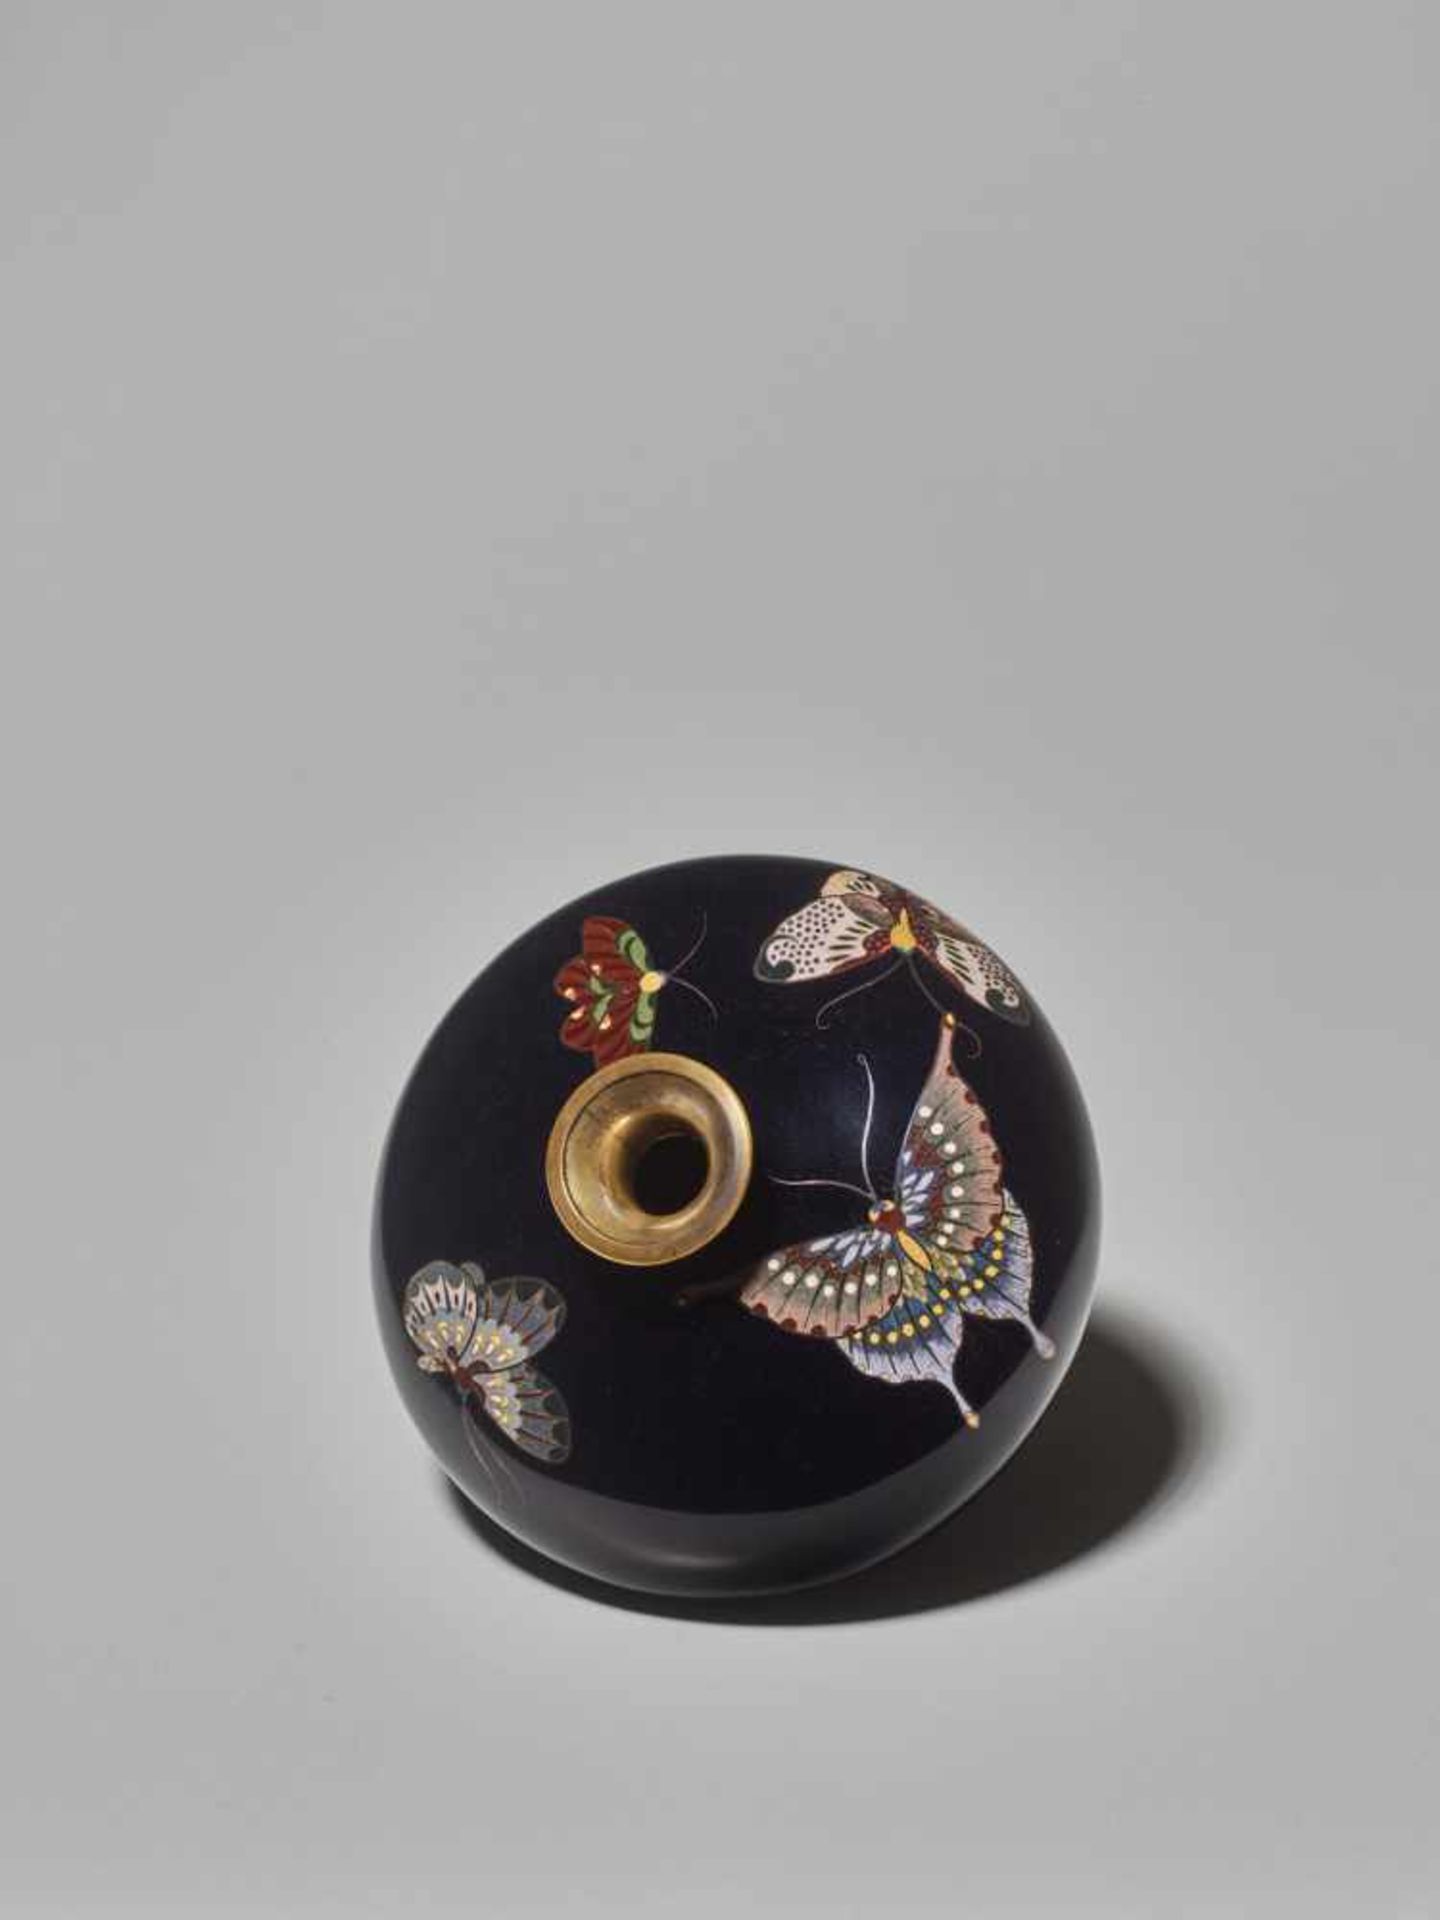 A JAPANESE CLOISONNÉ VASE WITH BUTTERFLIES Cloisonné with colored enamelsJapan, Meiji period (1868 - - Image 4 of 7